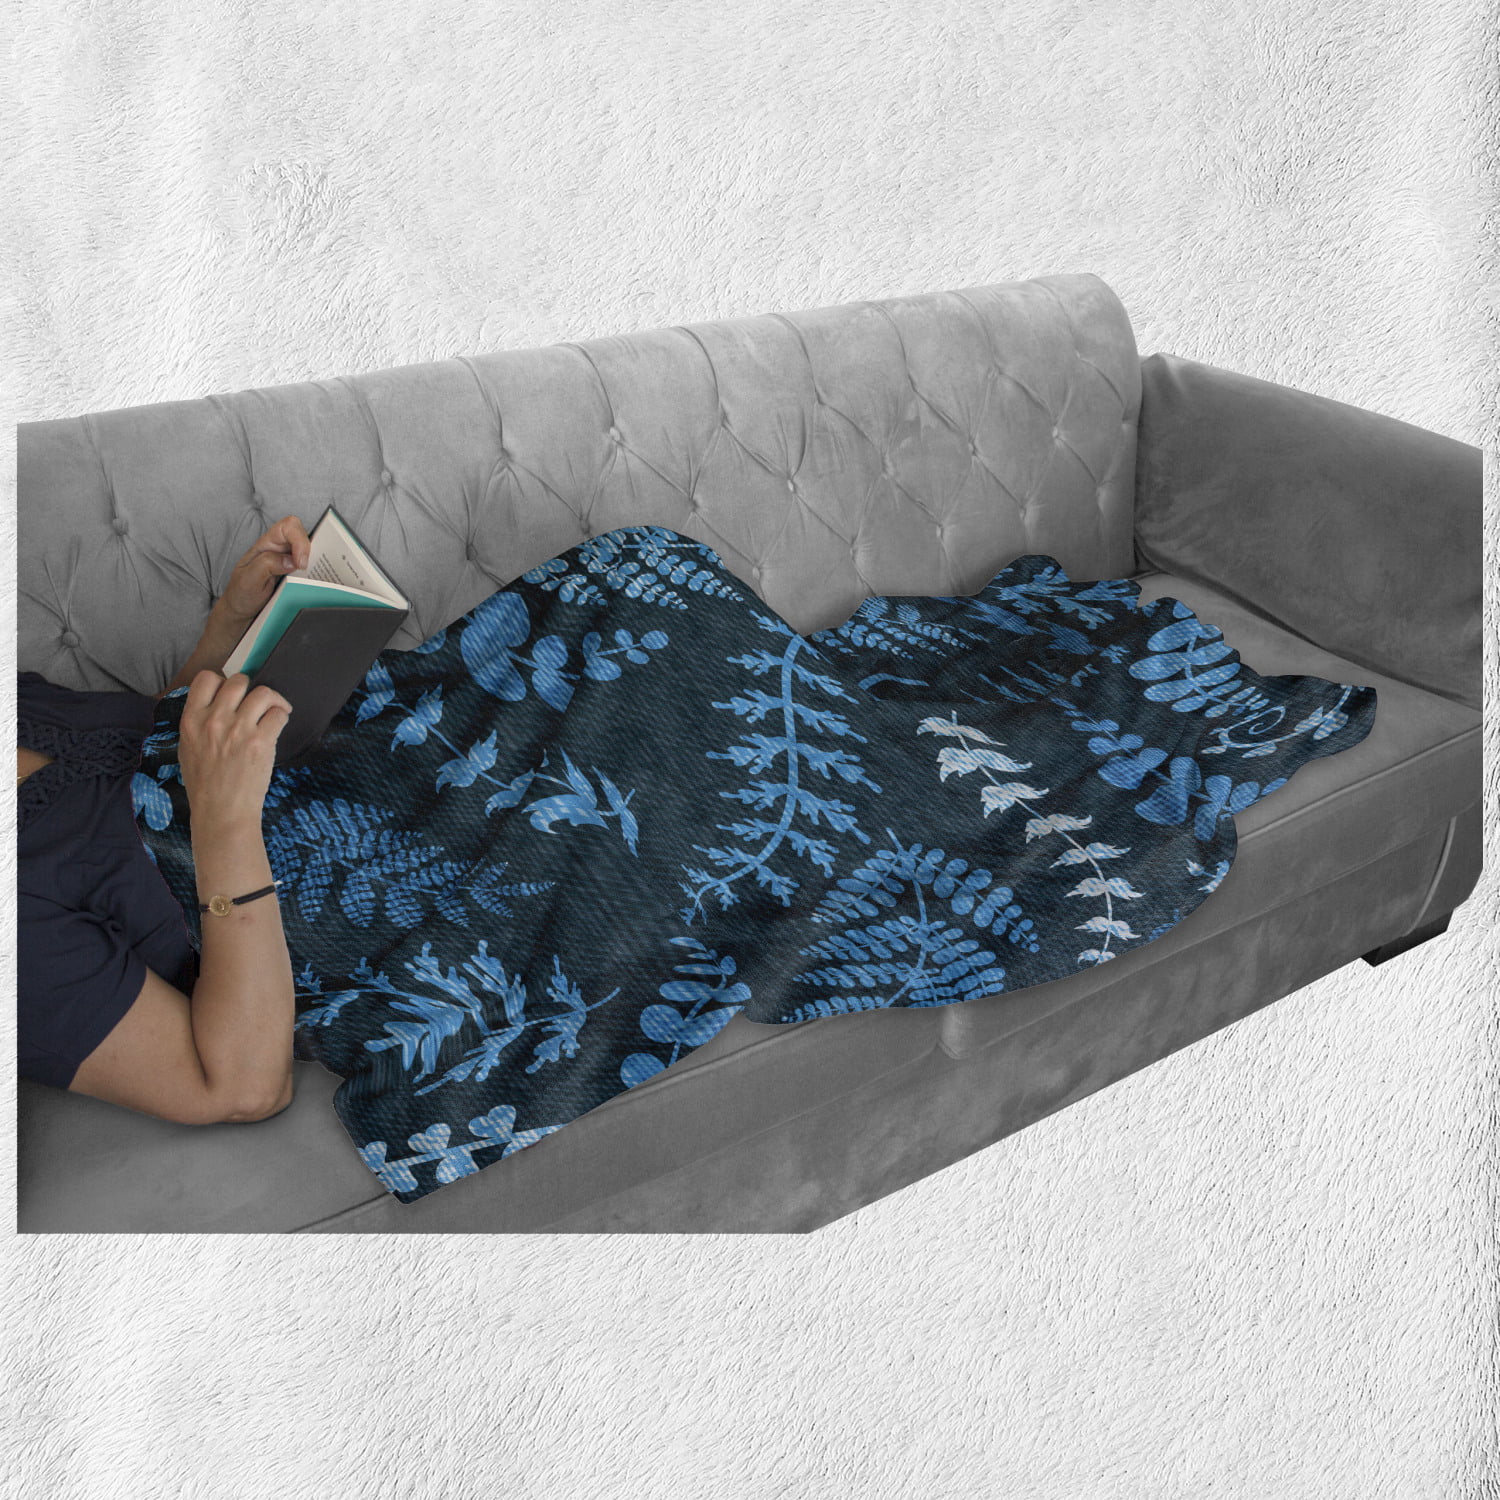 Cozy Plush for Indoor and Outdoor Use 60 x 80 Dark Green Backdrop Floral Swirl Leaves Branches Details Image Turquoise Pale Blue Ambesonne Indigo Soft Flannel Fleece Throw Blanket 